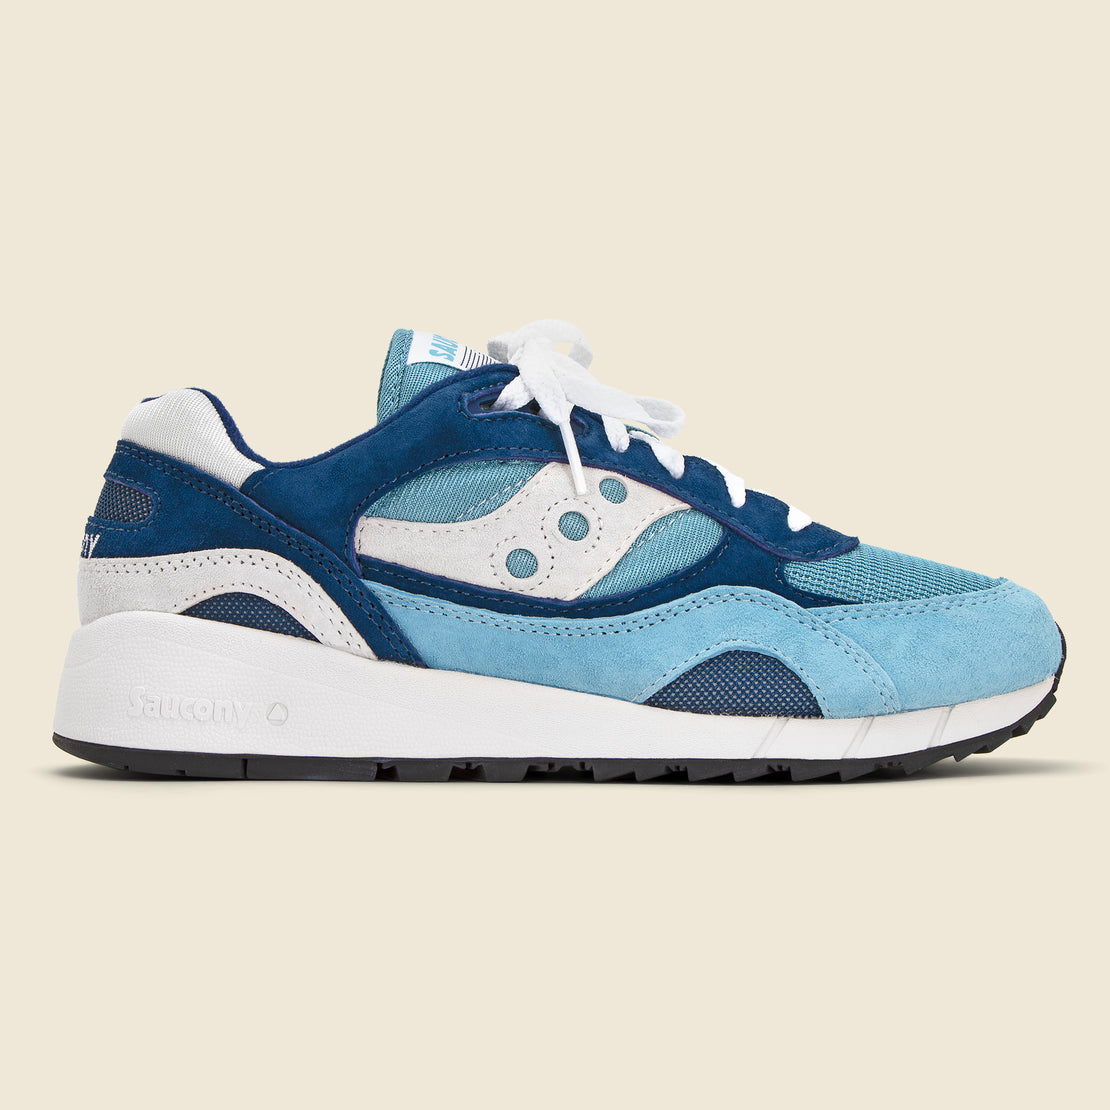 Saucony Shadow 6000 Sneaker - Blue/White